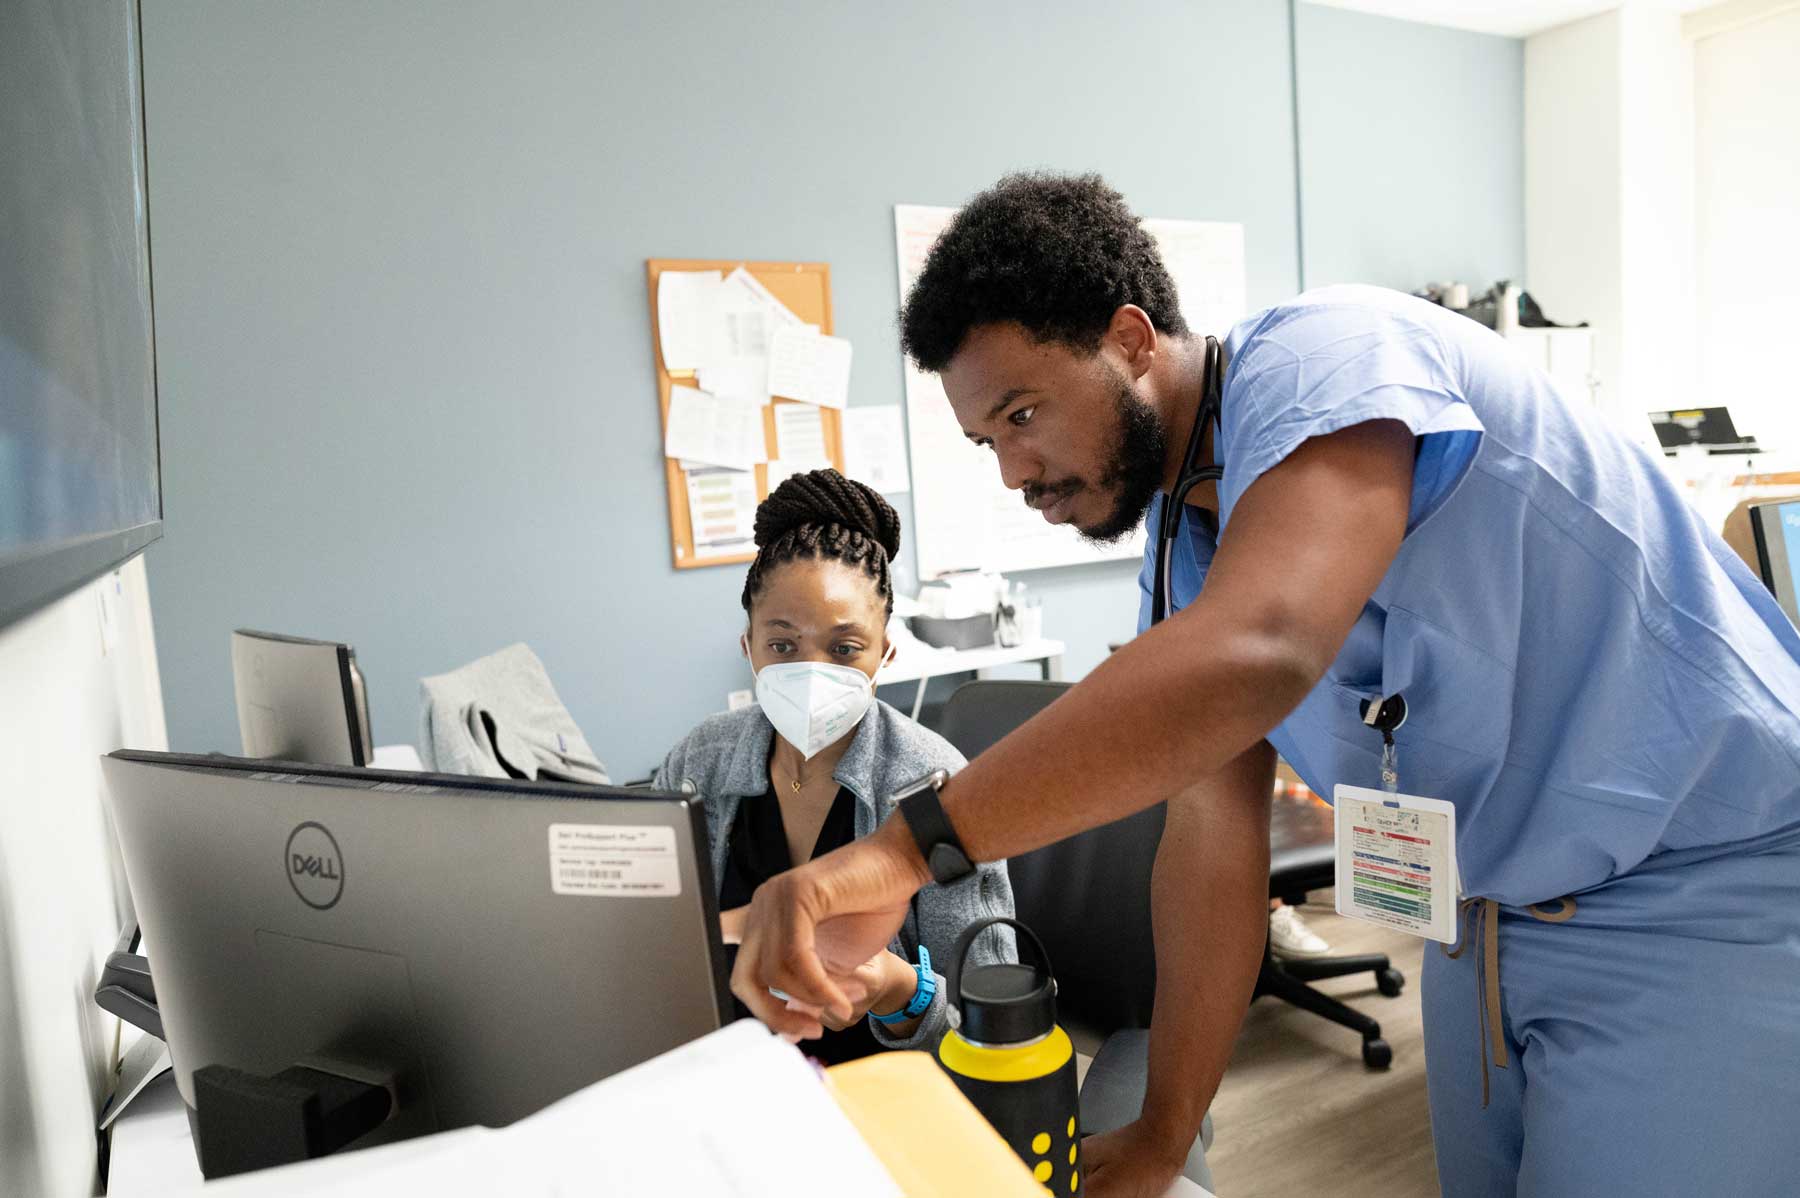 Two Black medical residents look at a computer. Kelechi (left) is a first-year resident, and Chris (right) is a senior resident.